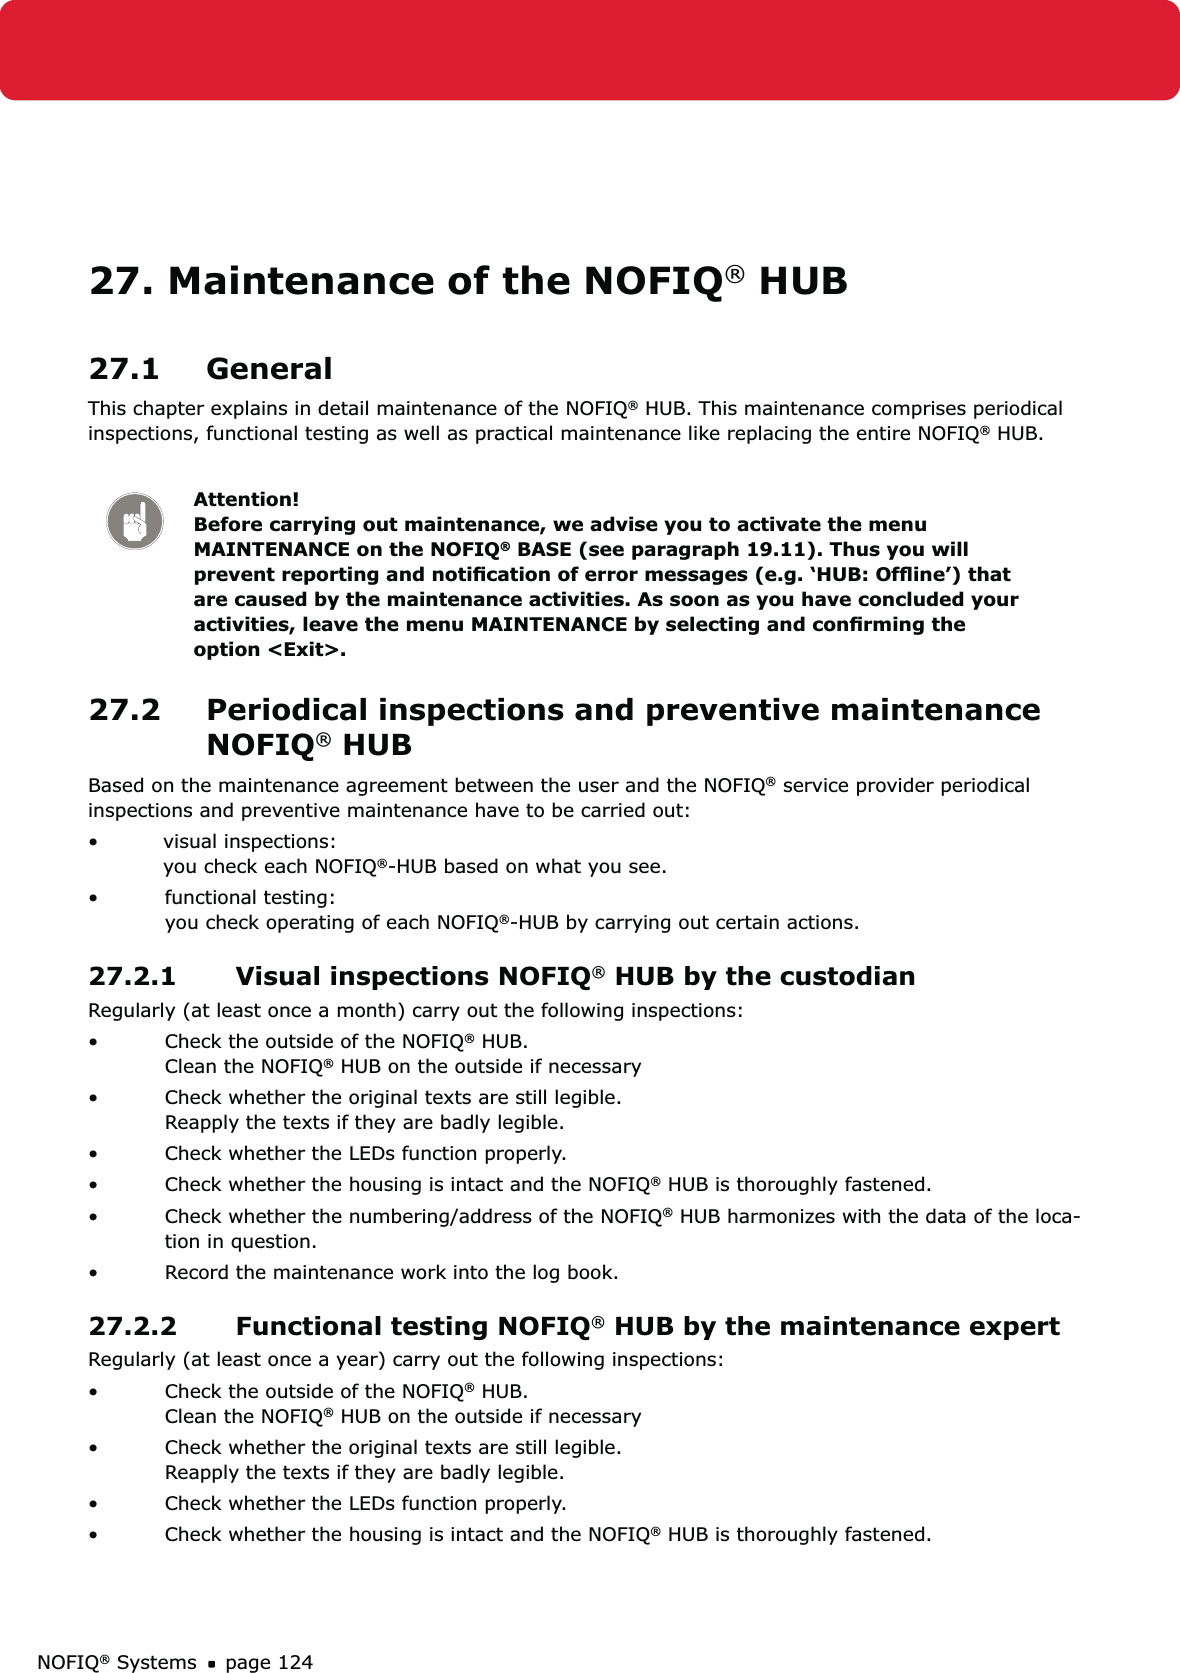 NOFIQ® Systems page 12427. Maintenance of the NOFIQ® HUB27.1 GeneralThis chapter explains in detail maintenance of the NOFIQ® HUB. This maintenance comprises periodical inspections, functional testing as well as practical maintenance like replacing the entire NOFIQ® HUB.Attention! Before carrying out maintenance, we advise you to activate the menu MAINTENANCE on the NOFIQ® BASE (see paragraph 19.11). Thus you will prevent reporting and notiﬁcation of error messages (e.g. ‘HUB: Ofﬂine’) that are caused by the maintenance activities. As soon as you have concluded your activities, leave the menu MAINTENANCE by selecting and conﬁrming the option &lt;Exit&gt;.27.2  Periodical inspections and preventive maintenance NOFIQ® HUBBased on the maintenance agreement between the user and the NOFIQ® service provider periodical inspections and preventive maintenance have to be carried out:• visual inspections:   you check each NOFIQ®-HUB based on what you see.• functional testing: you check operating of each NOFIQ®-HUB by carrying out certain actions.27.2.1  Visual inspections NOFIQ® HUB by the custodian Regularly (at least once a month) carry out the following inspections:Check the outside of the NOFIQ•  ® HUB. Clean the NOFIQ® HUB on the outside if necessaryCheck whether the original texts are still legible. • Reapply the texts if they are badly legible.Check whether the LEDs function properly.• Check whether the housing is intact and the NOFIQ•  ® HUB is thoroughly fastened.Check whether the numbering/address of the NOFIQ•  ® HUB harmonizes with the data of the loca-tion in question.Record the maintenance work into the log book.• 27.2.2  Functional testing NOFIQ® HUB by the maintenance expertRegularly (at least once a year) carry out the following inspections:Check the outside of the NOFIQ•  ® HUB. Clean the NOFIQ® HUB on the outside if necessaryCheck whether the original texts are still legible. • Reapply the texts if they are badly legible.Check whether the LEDs function properly.• Check whether the housing is intact and the NOFIQ•  ® HUB is thoroughly fastened.